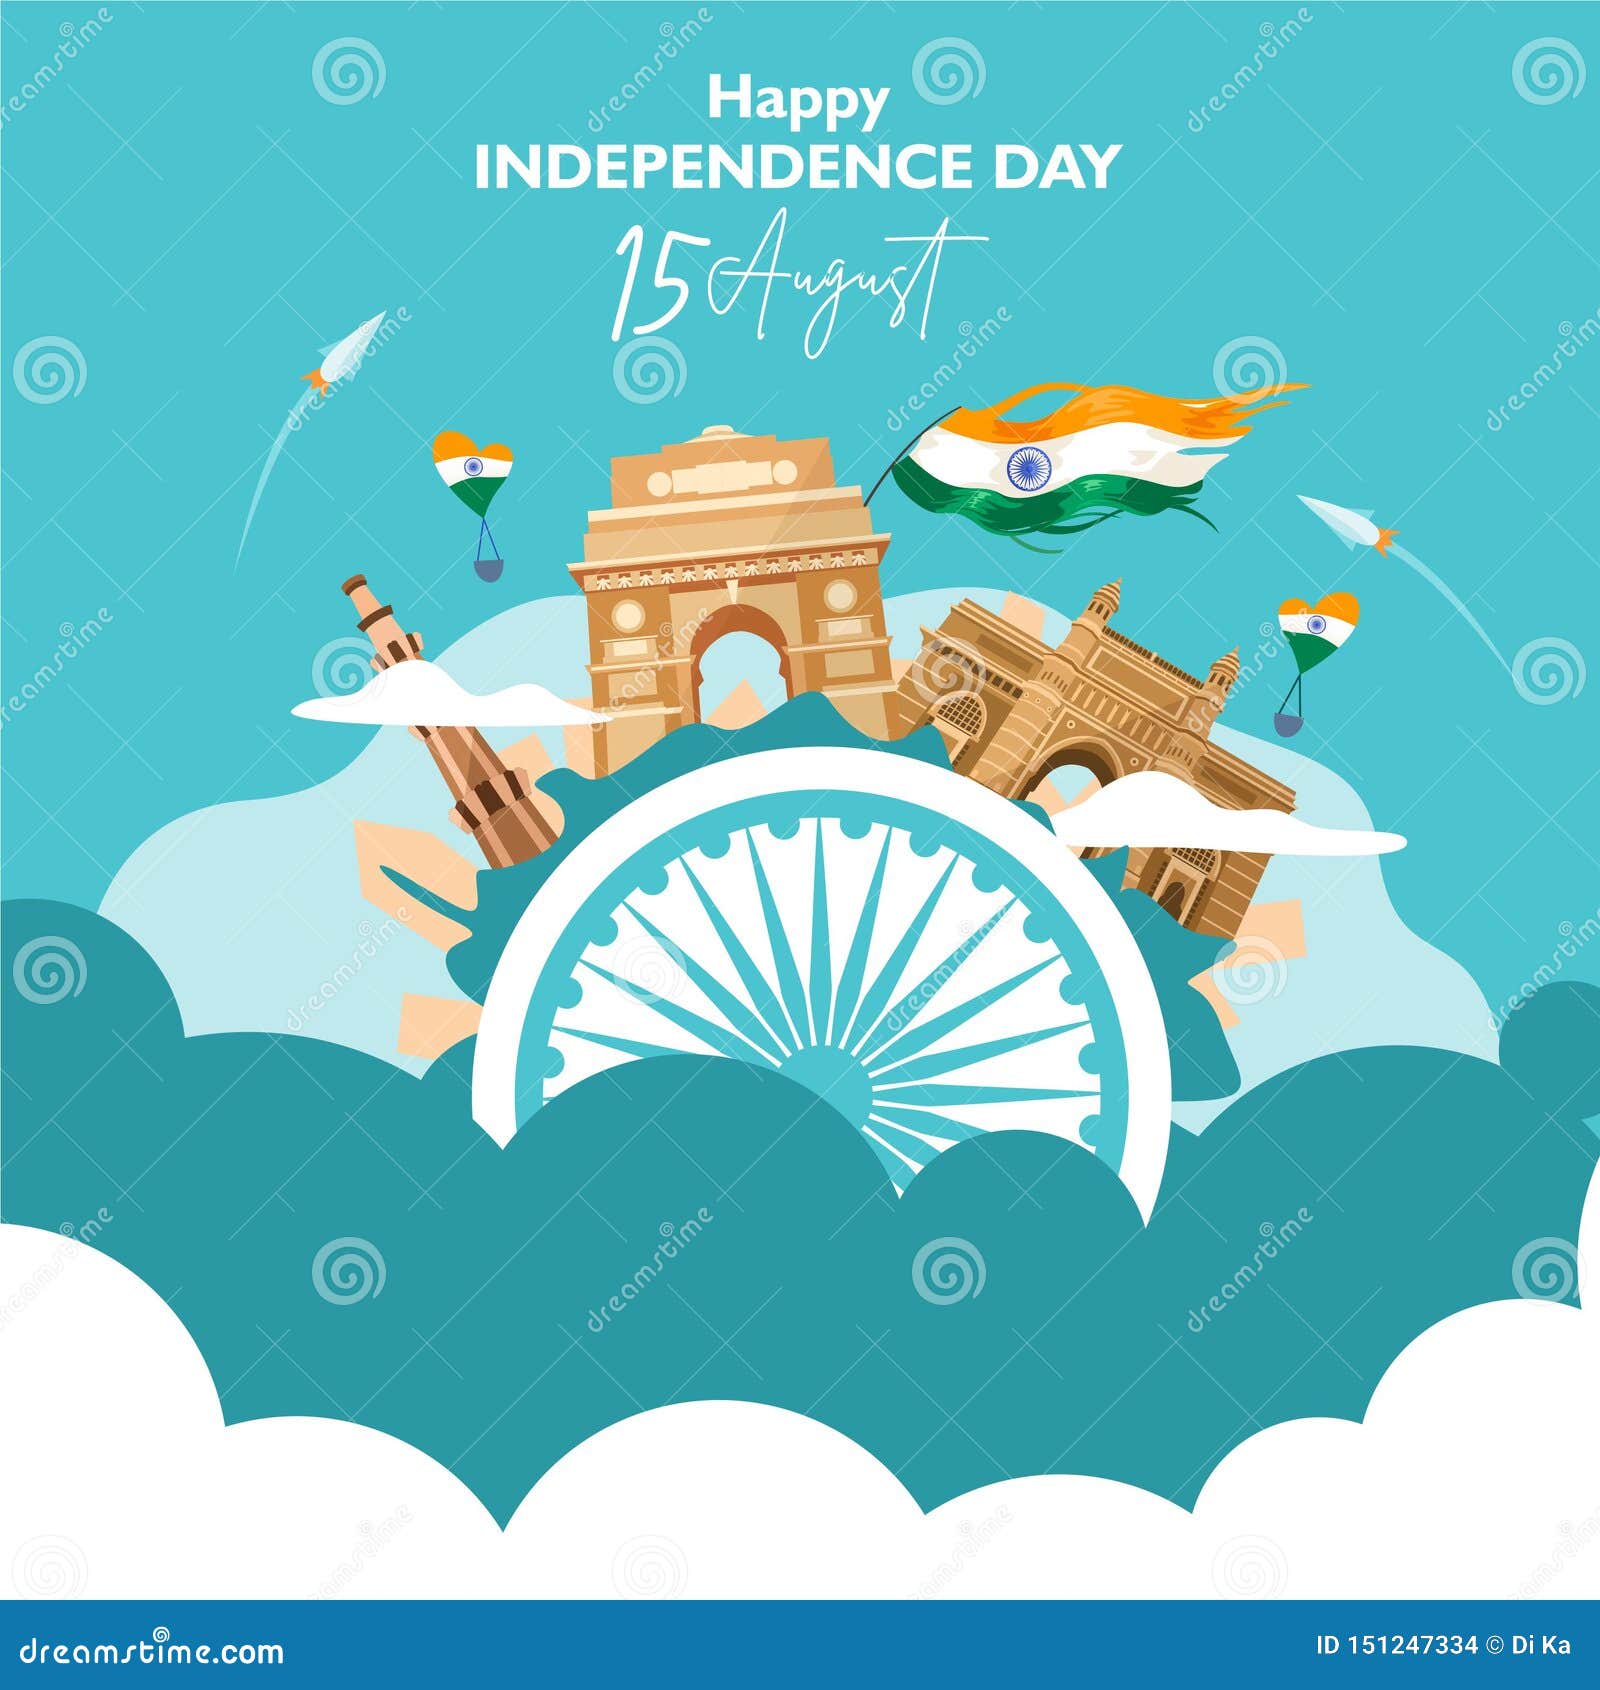 Independence Day Of India PNG Images, Republic Day, August 15, January 26  PNG Transparent Background - Pngtree | Independence day wallpaper,  Independence day images, Independence day india